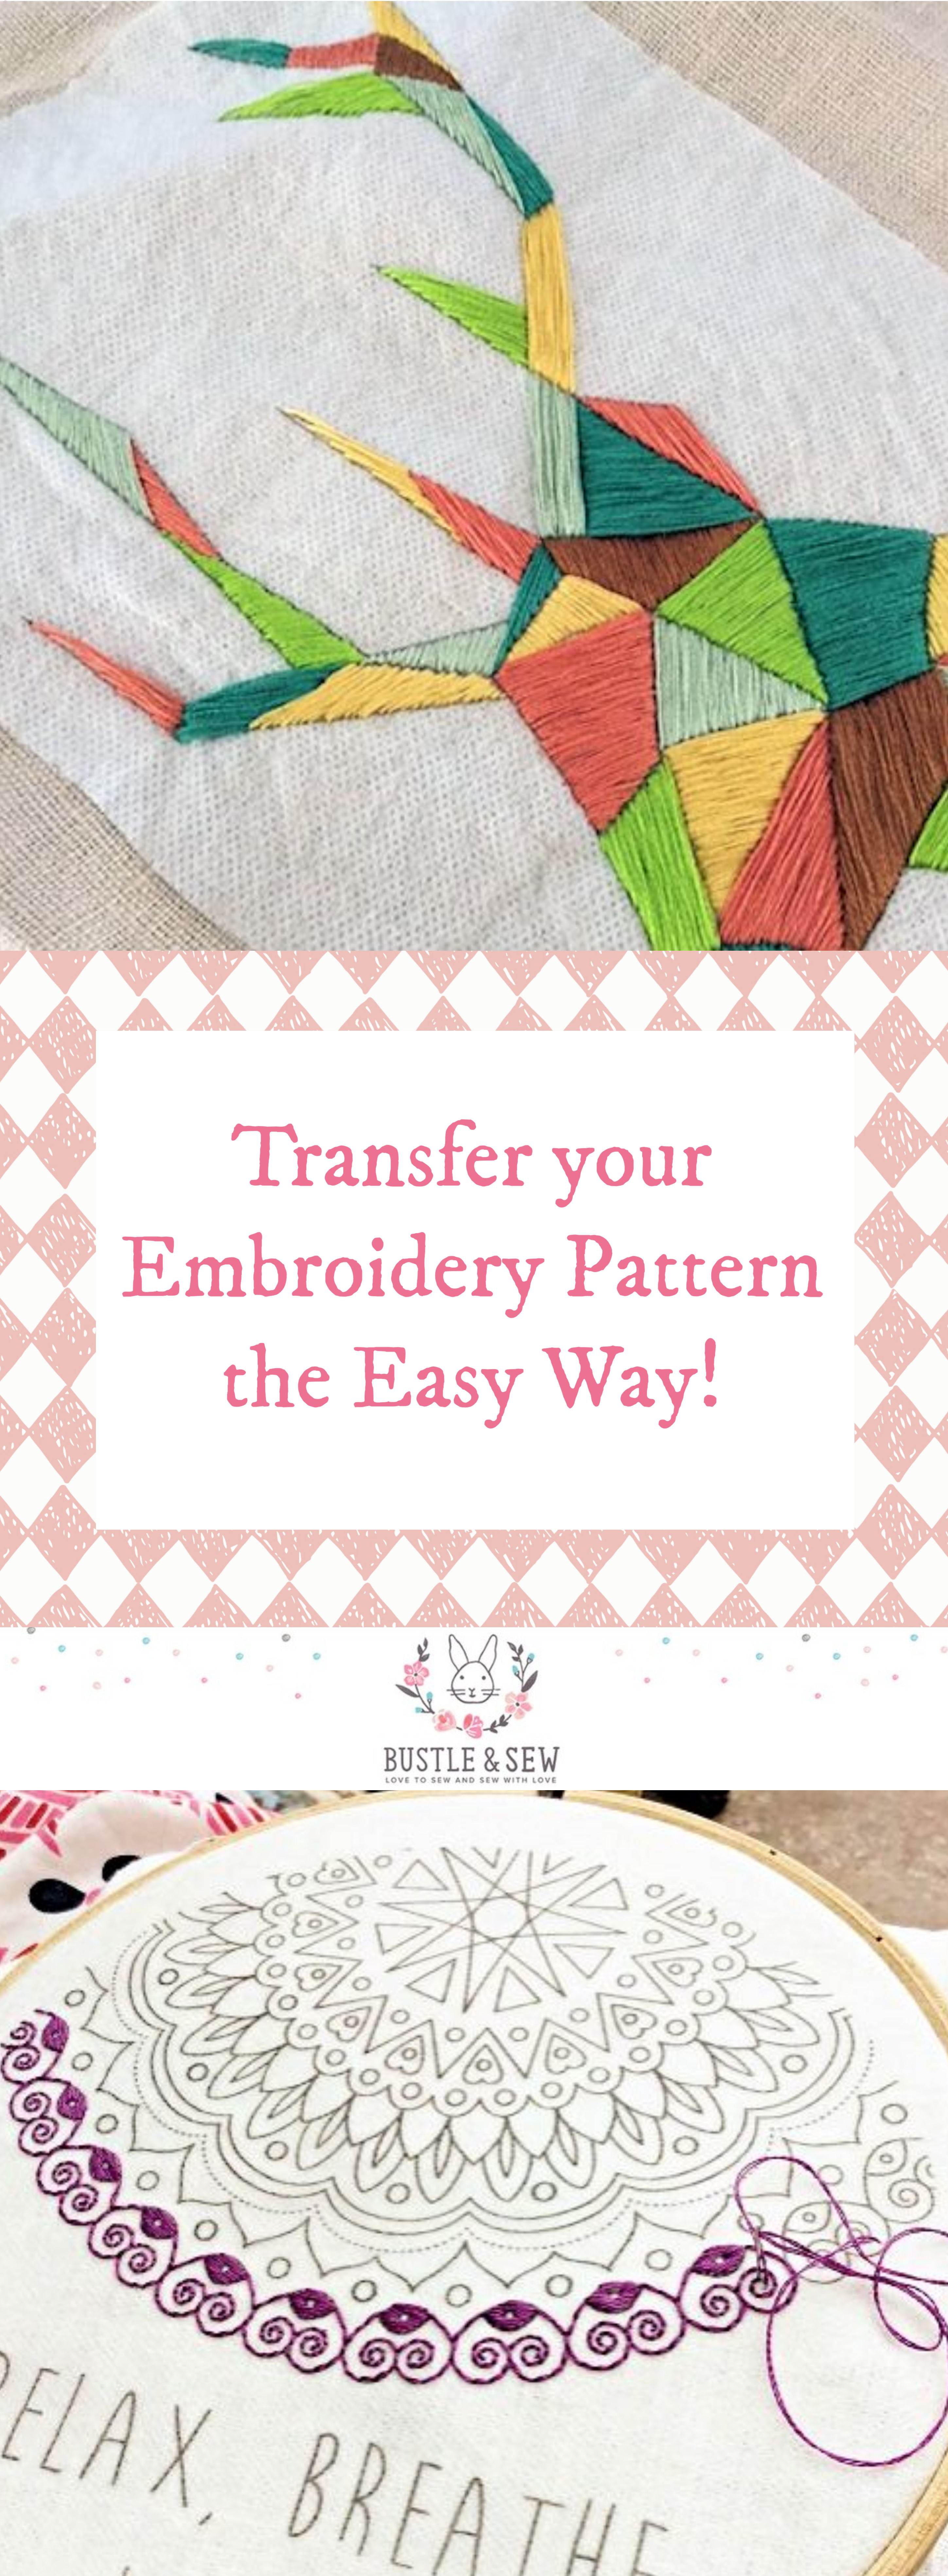 Transfer Embroidery Pattern Transferring Your Embroidery Pattern Using Sulky Sticky Fabri Solvy